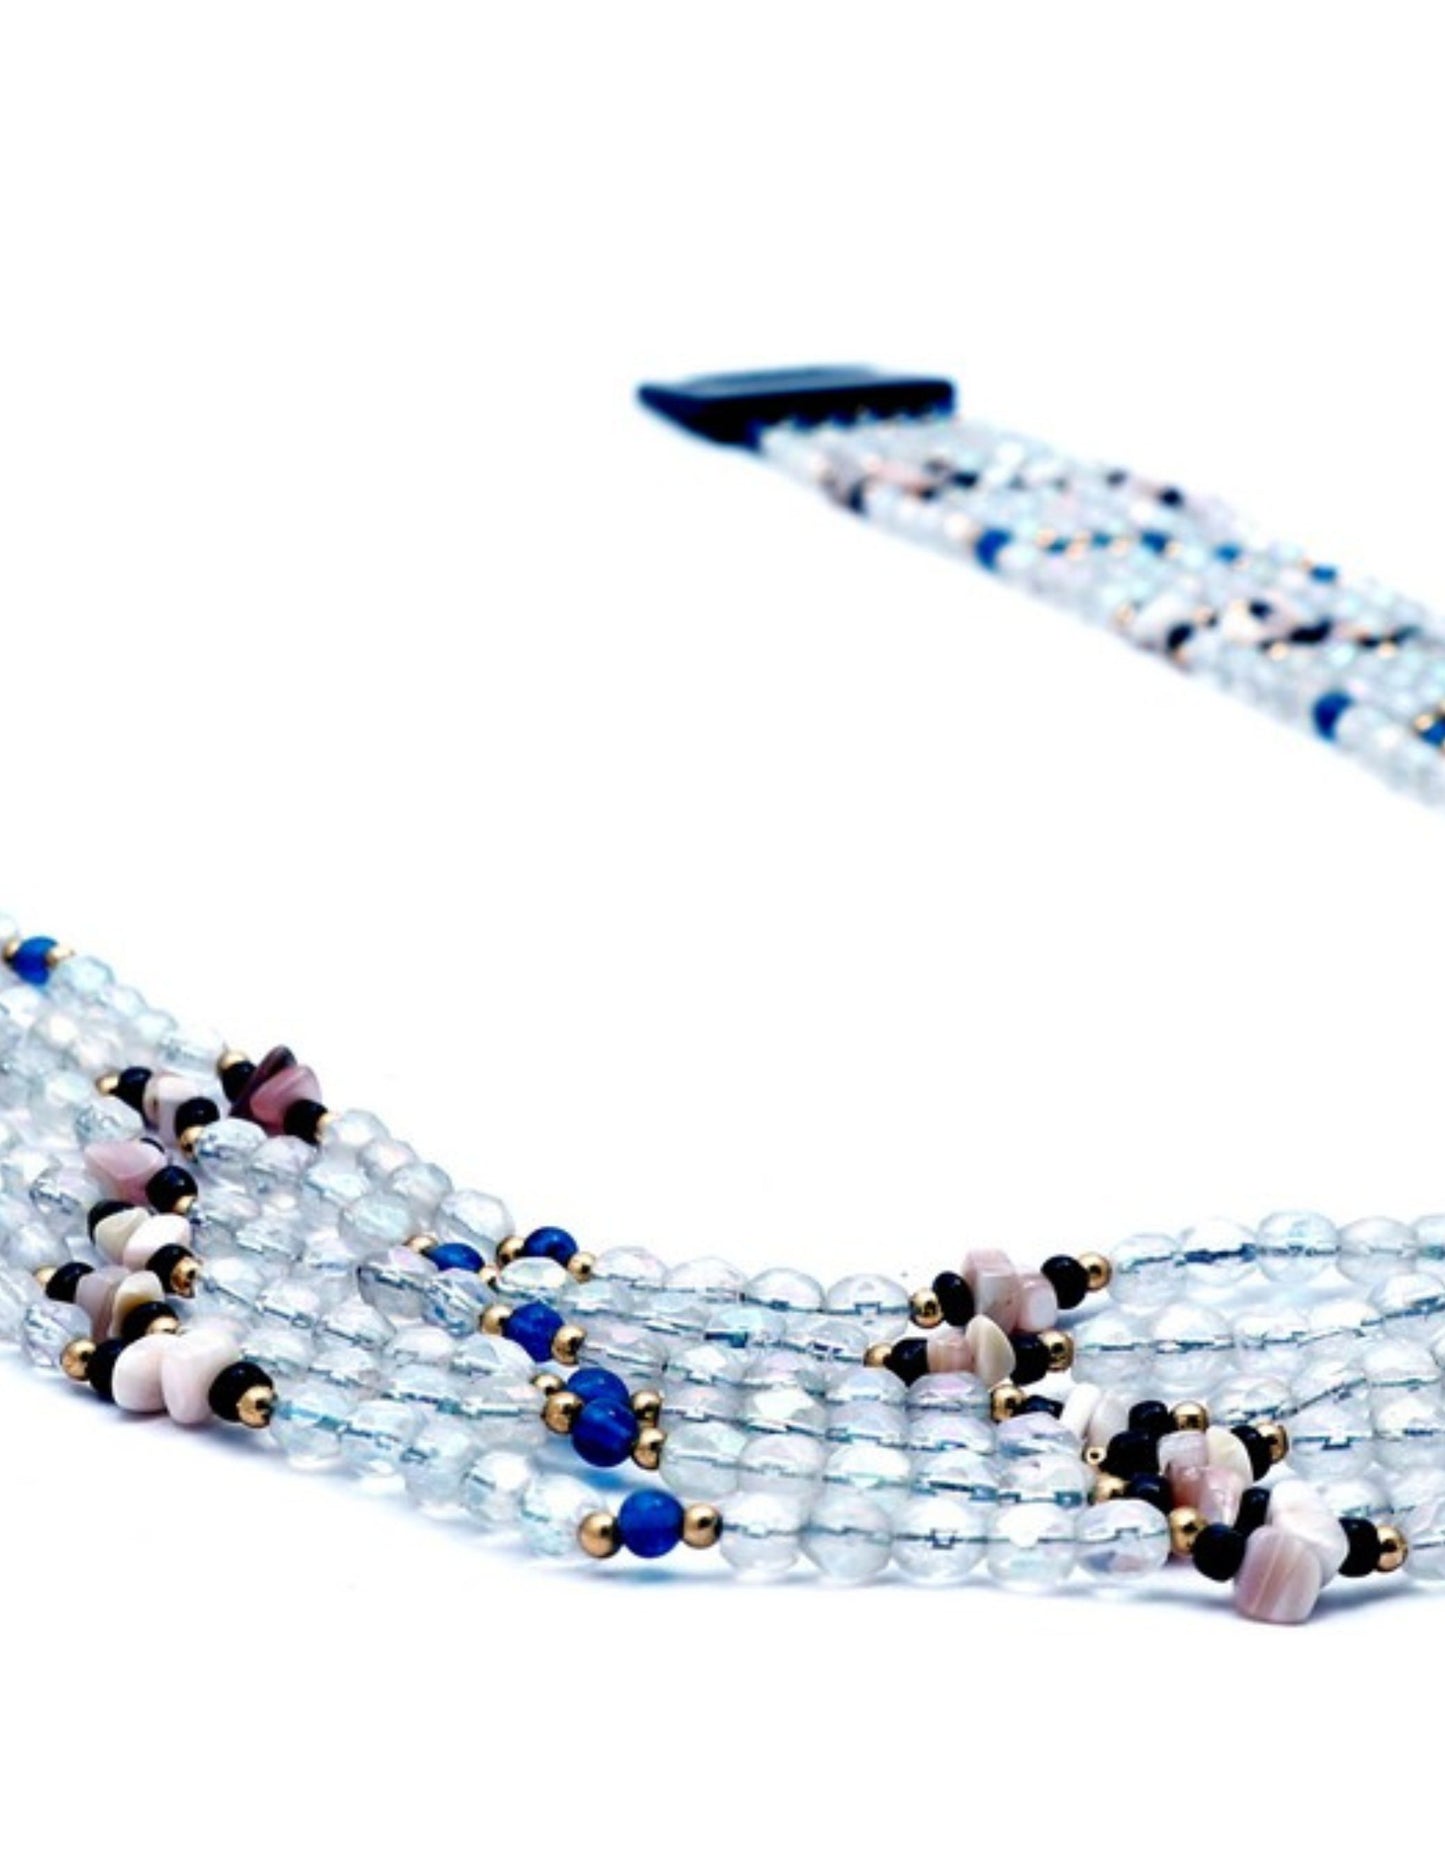 Multilayered transparent beads with stone